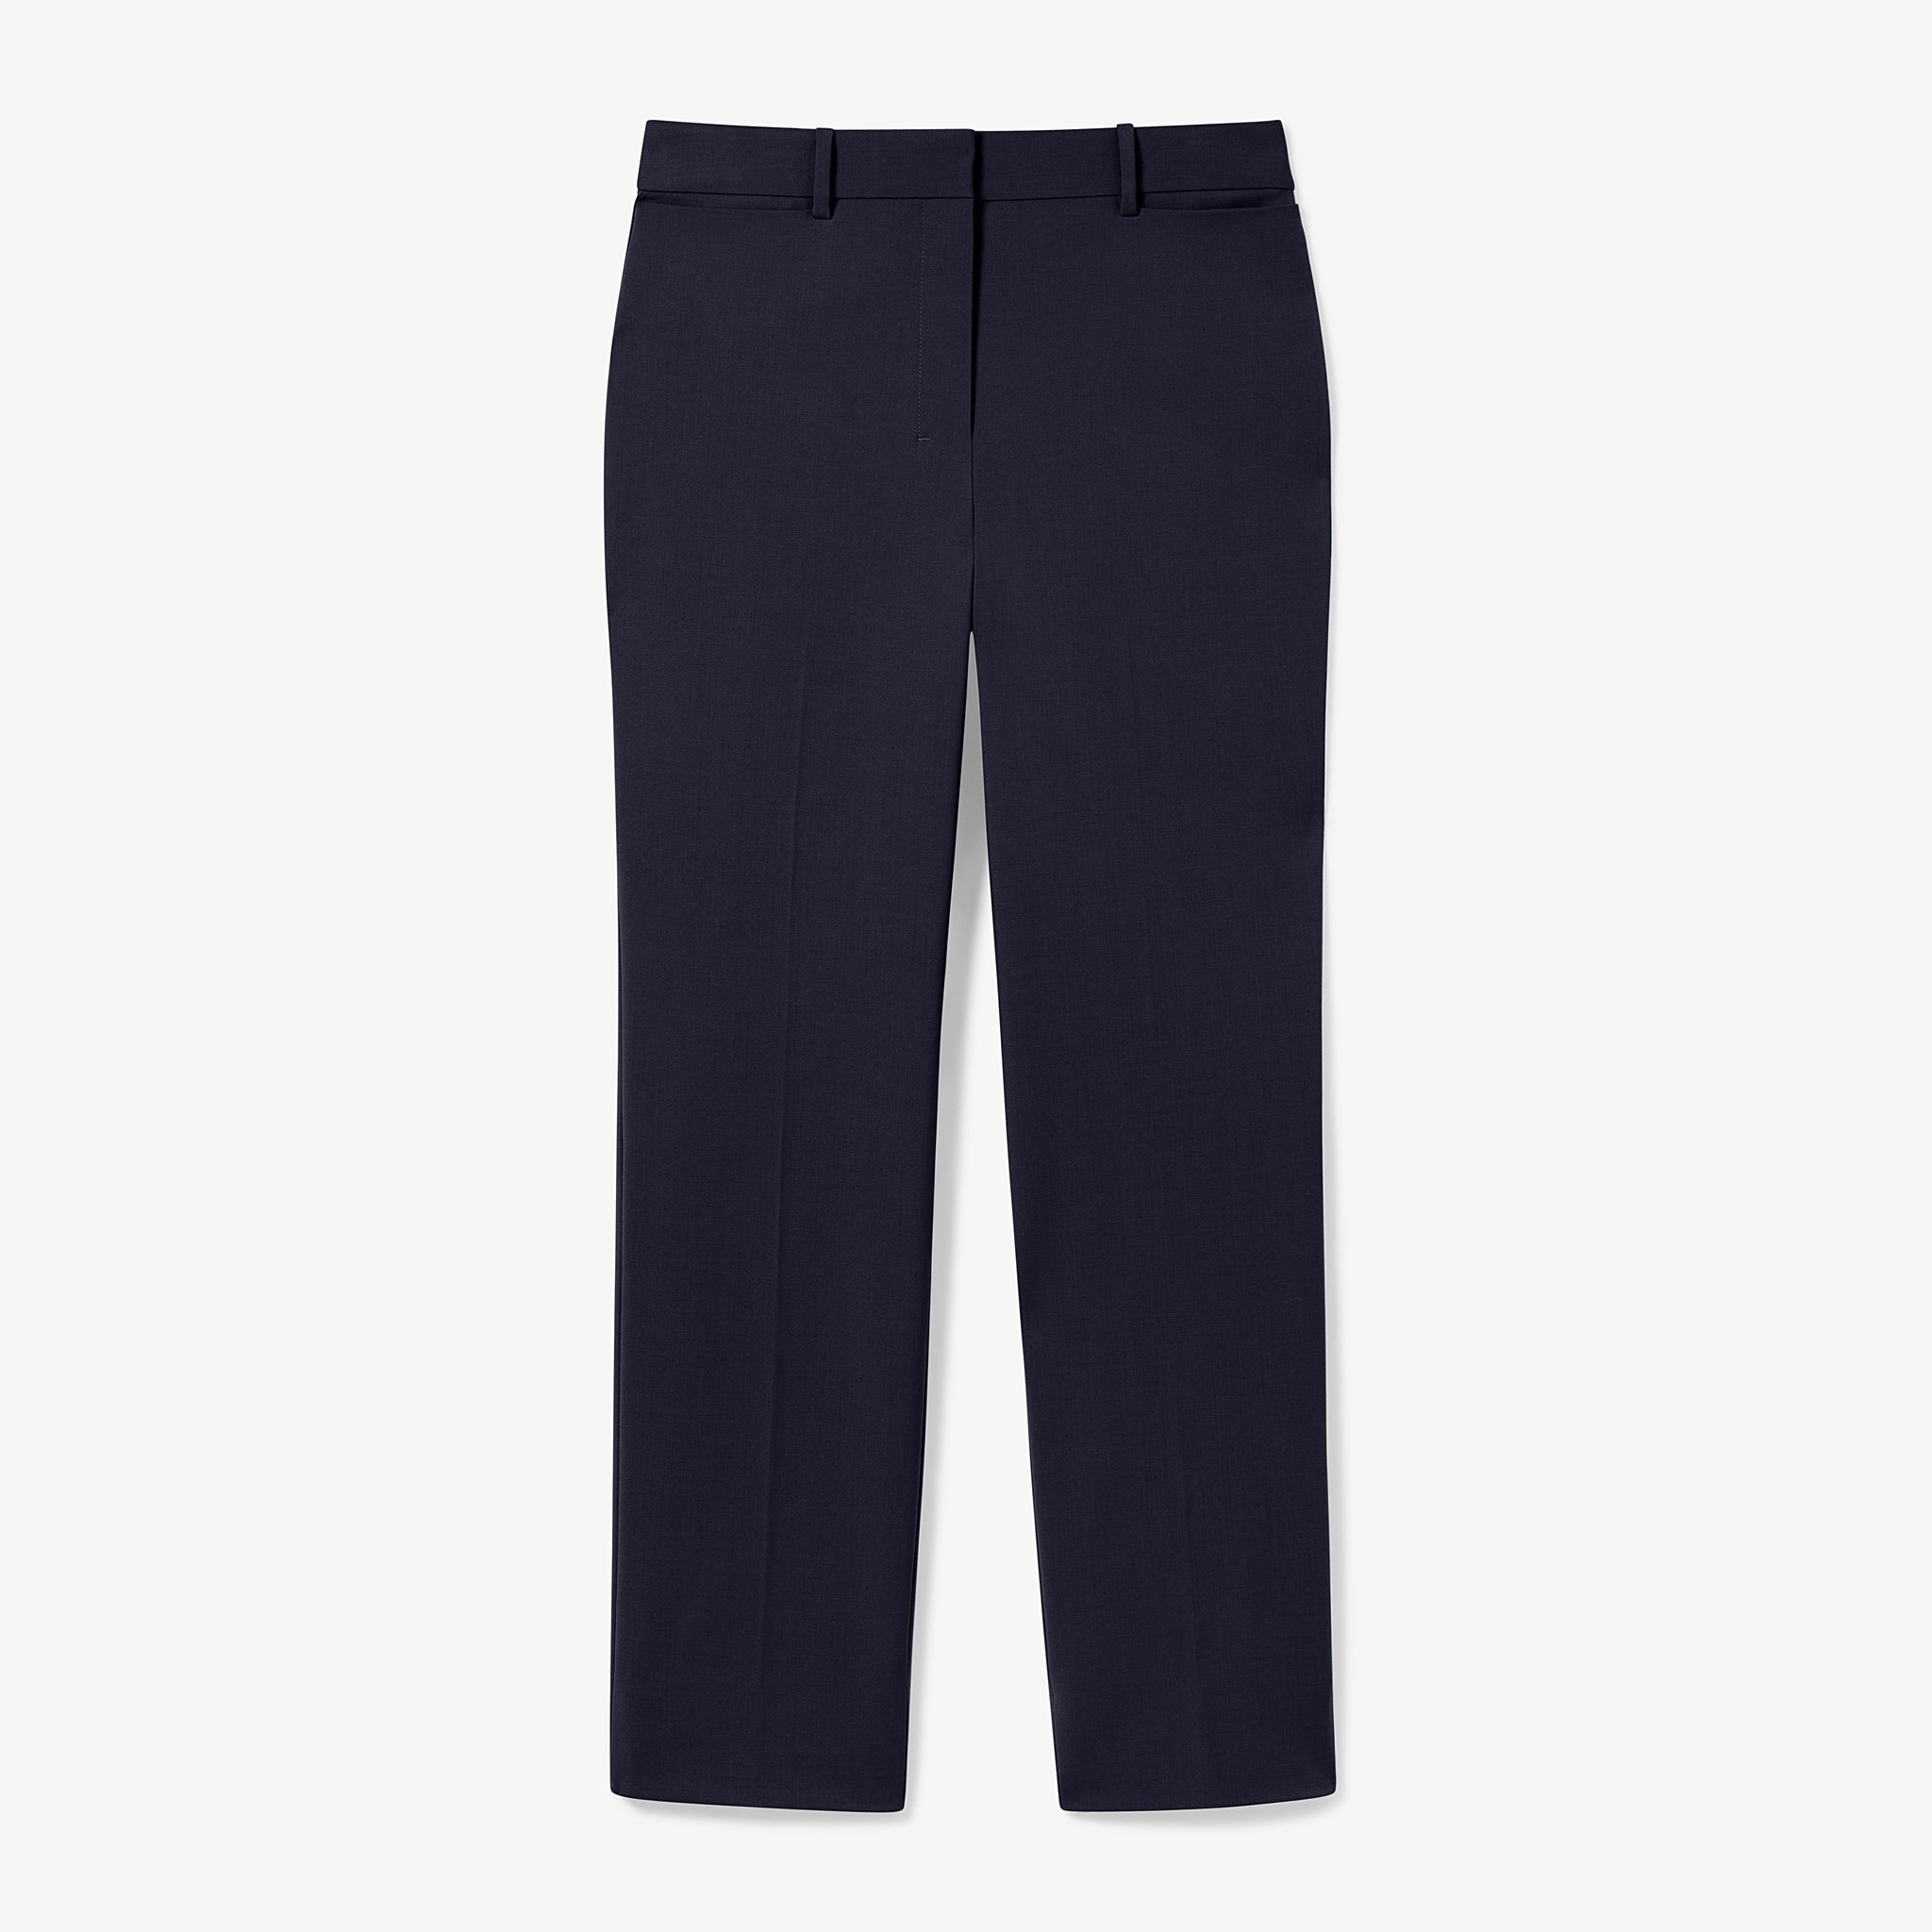 packshot image of the smith pant in galaxy blue